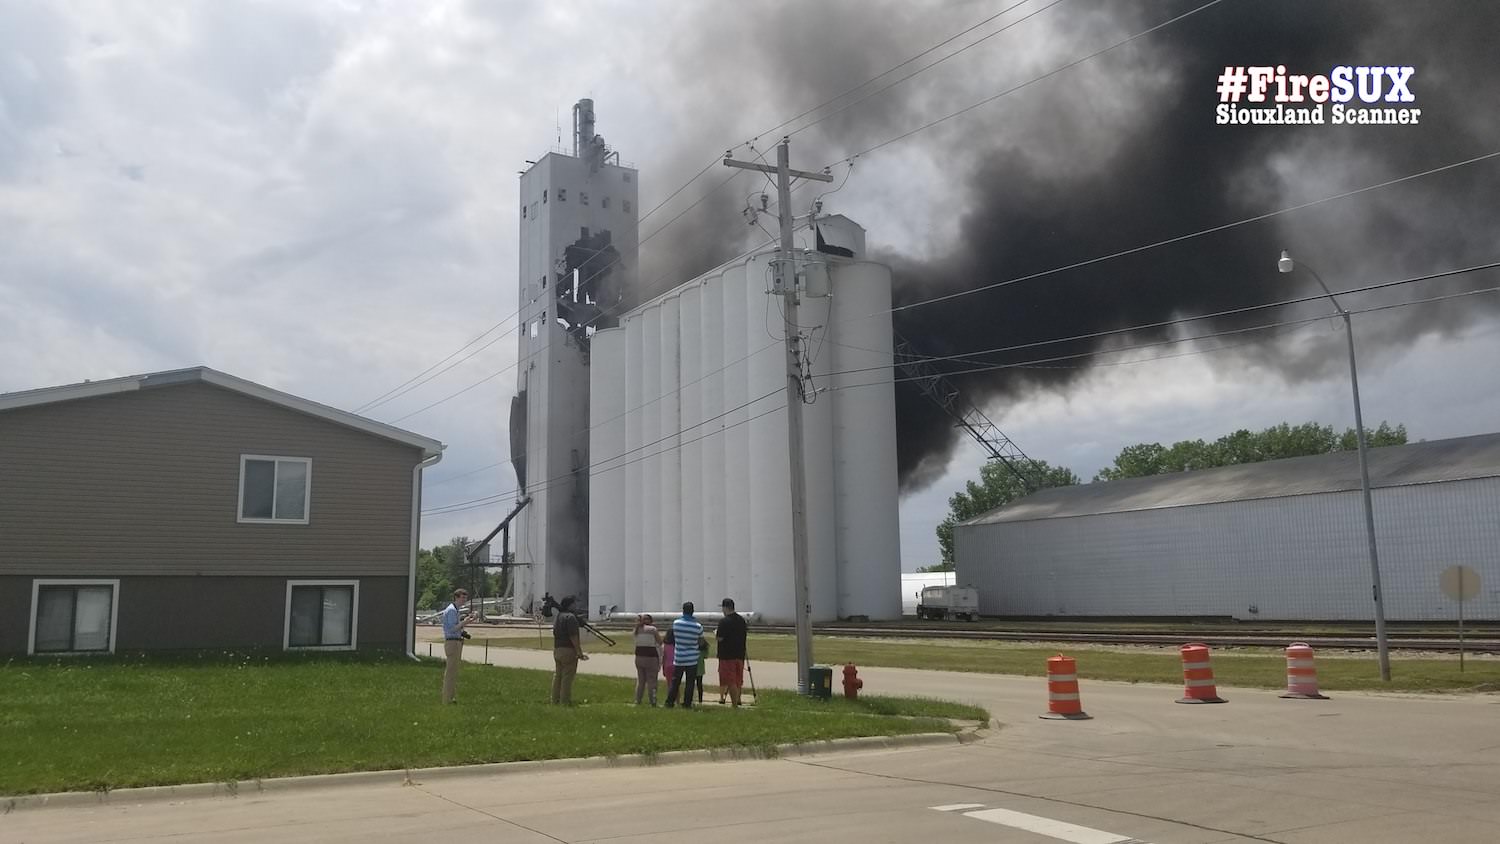 Anderson Grain Elevator explosion and fire in South Sioux City Nebraska